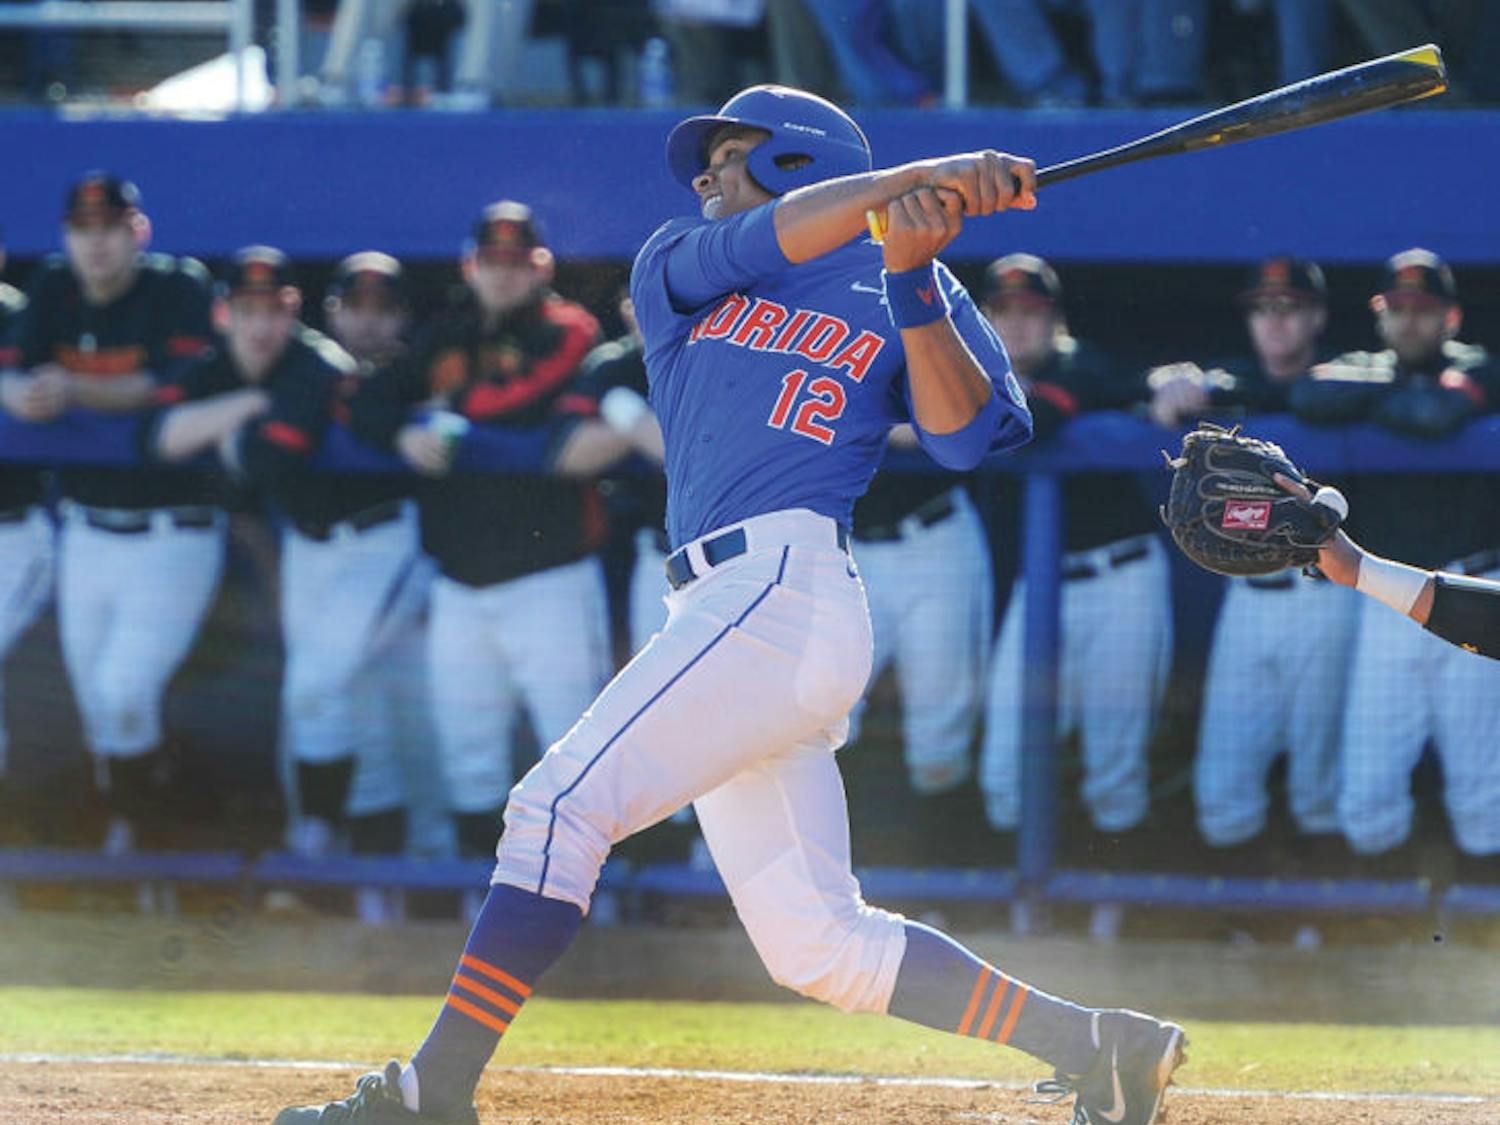 Richie Martin hits during Florida’s 9-7 loss against Maryland on Feb. 15 at McKethan Stadium. Martin went 3-for-3 at the plate and scored three runs in UF's 8-2 win against USF on Tuesday.